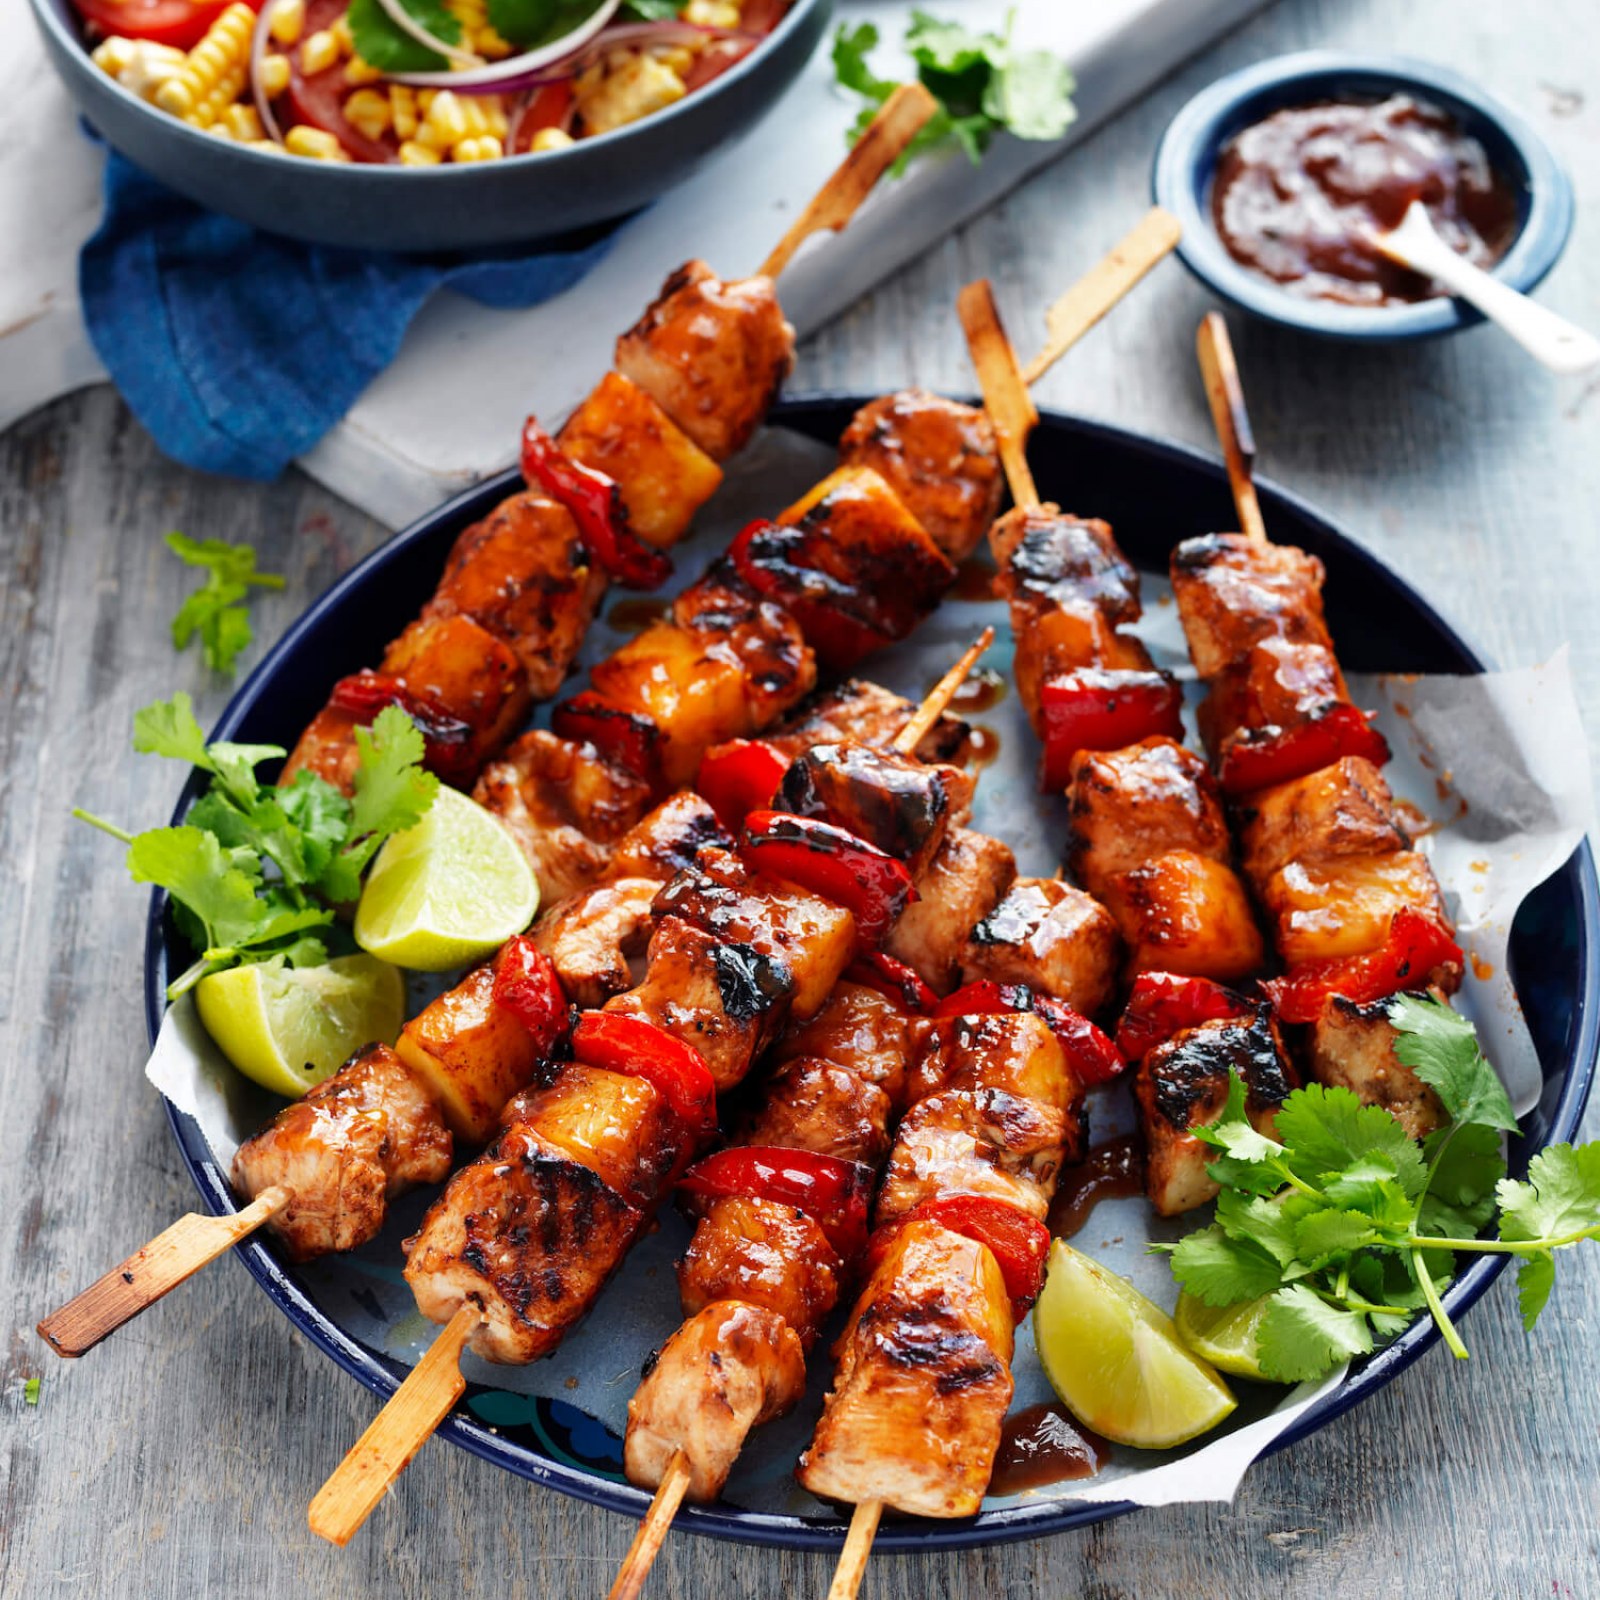 How to make BBQ skewers | Cook Free Recipes from Australia's Best Brands |  myfoodbook